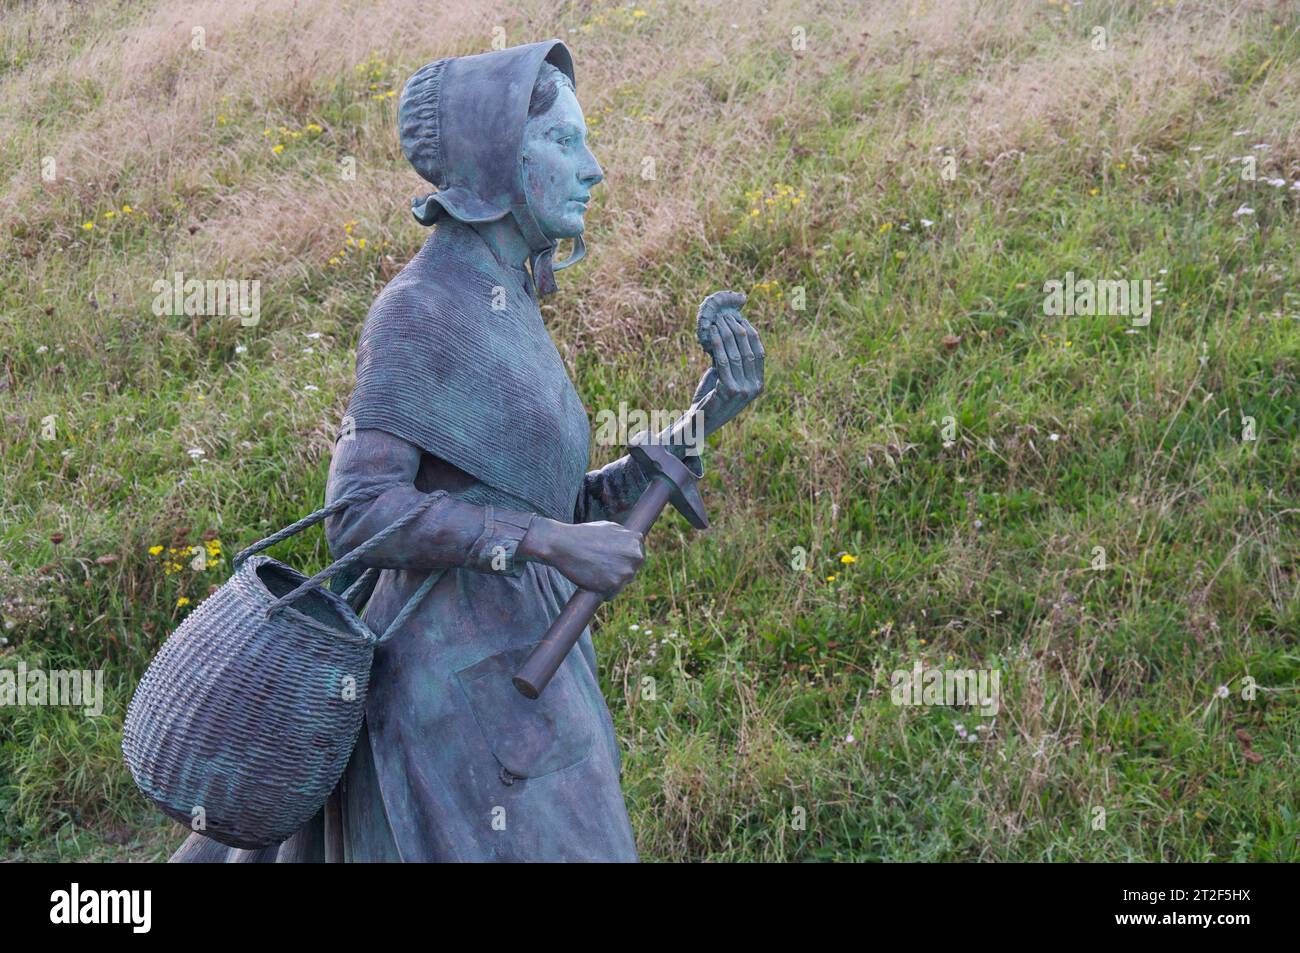 Bronze statue of the pioneering palaeontologist and fossil hunter Mary Anning 1799-1847. By sculptor Denise Dutton. Lyme Regis, Dorset, Jurassic Coast. Stock Photo